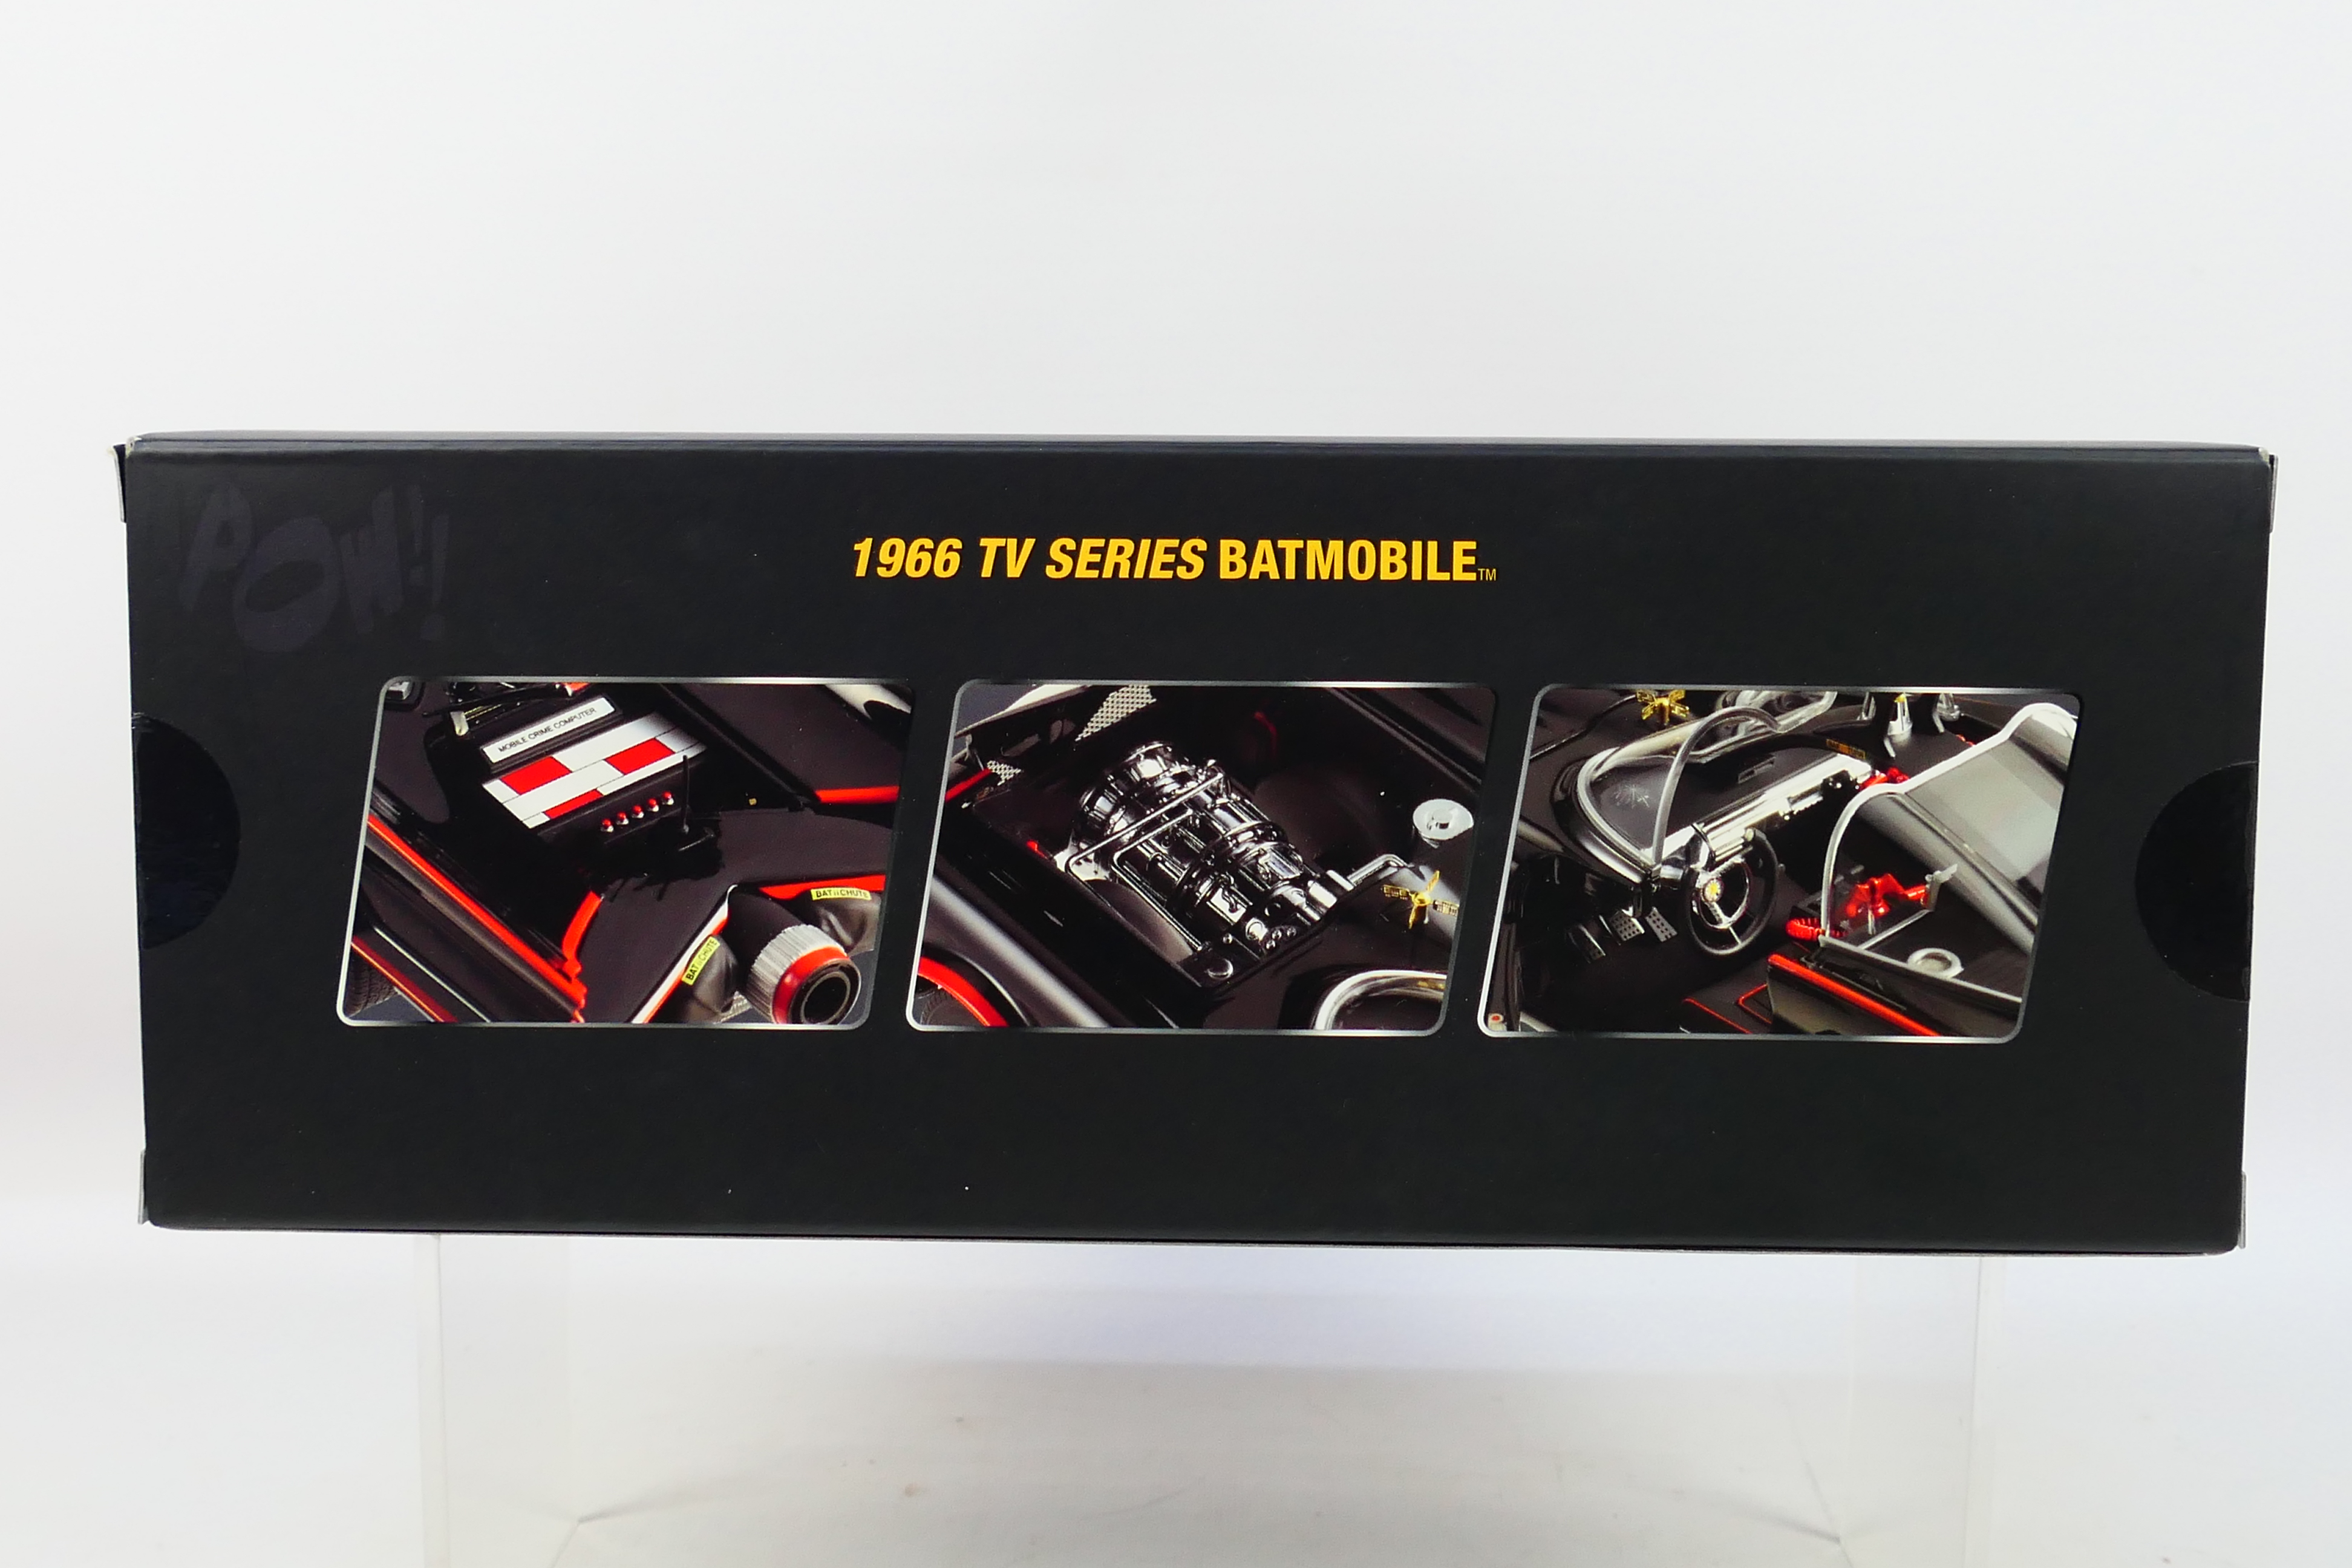 Hot Wheels - A boxed Hot Wheels 'Elite' Limited Edition 1:18 scale 1966 TV Series 'Batmobile'. - Image 6 of 6